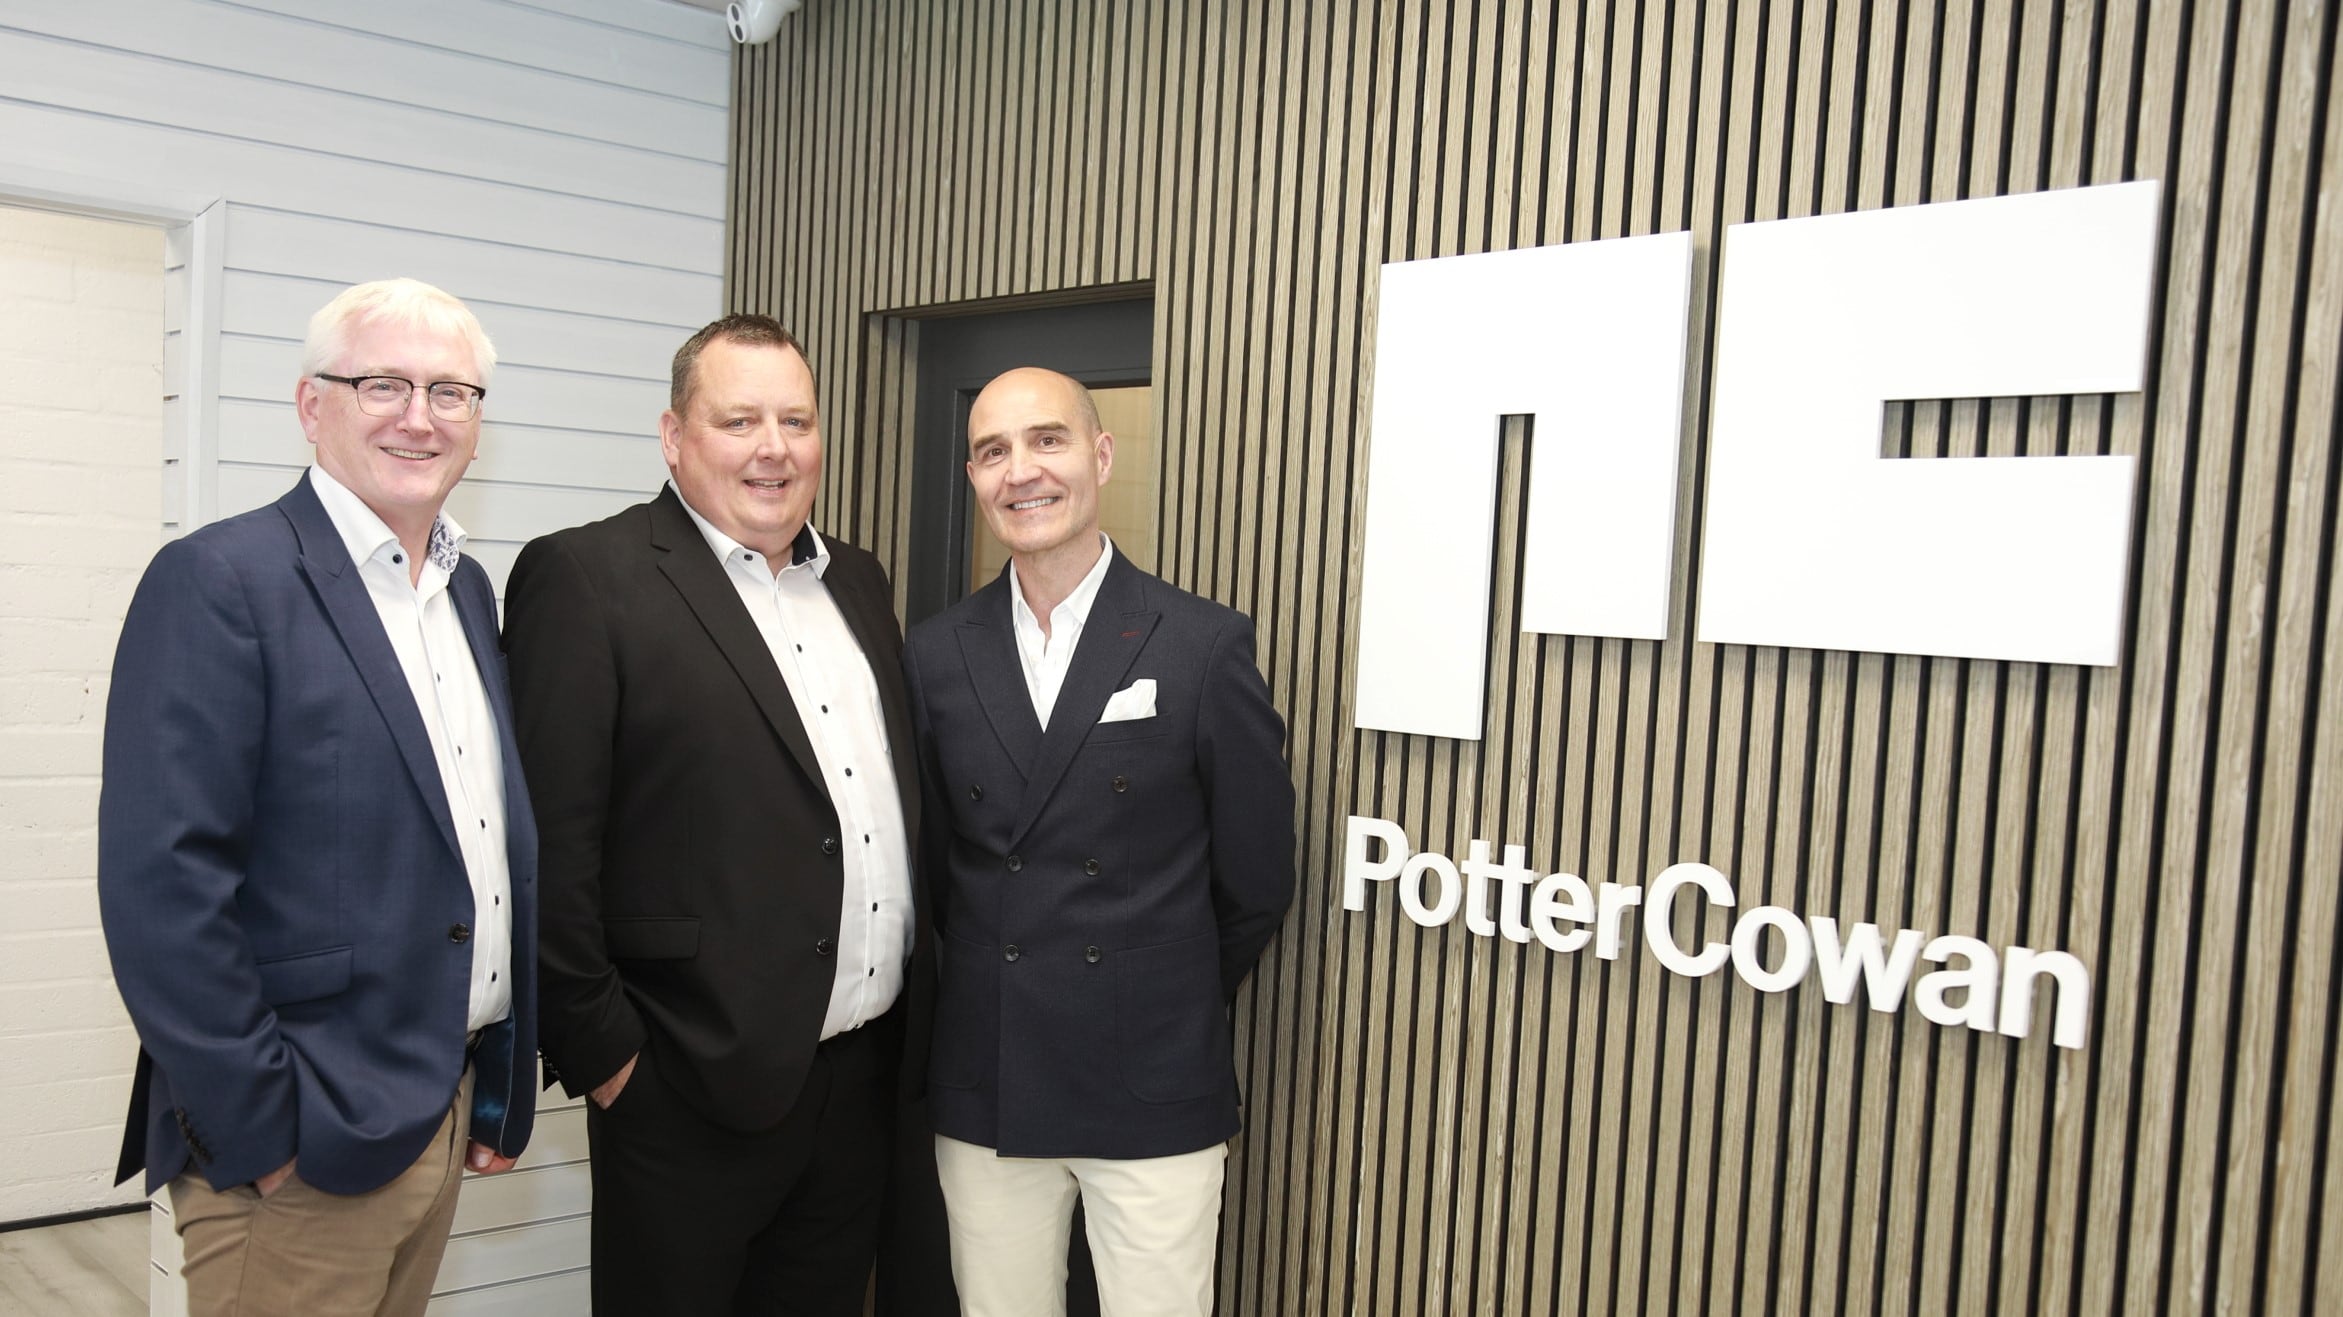 Kitchen solutions specialist Potter Cowan has opened a new showroom in Belfast in a six-figure investment supported by the company’s trusted supply partners